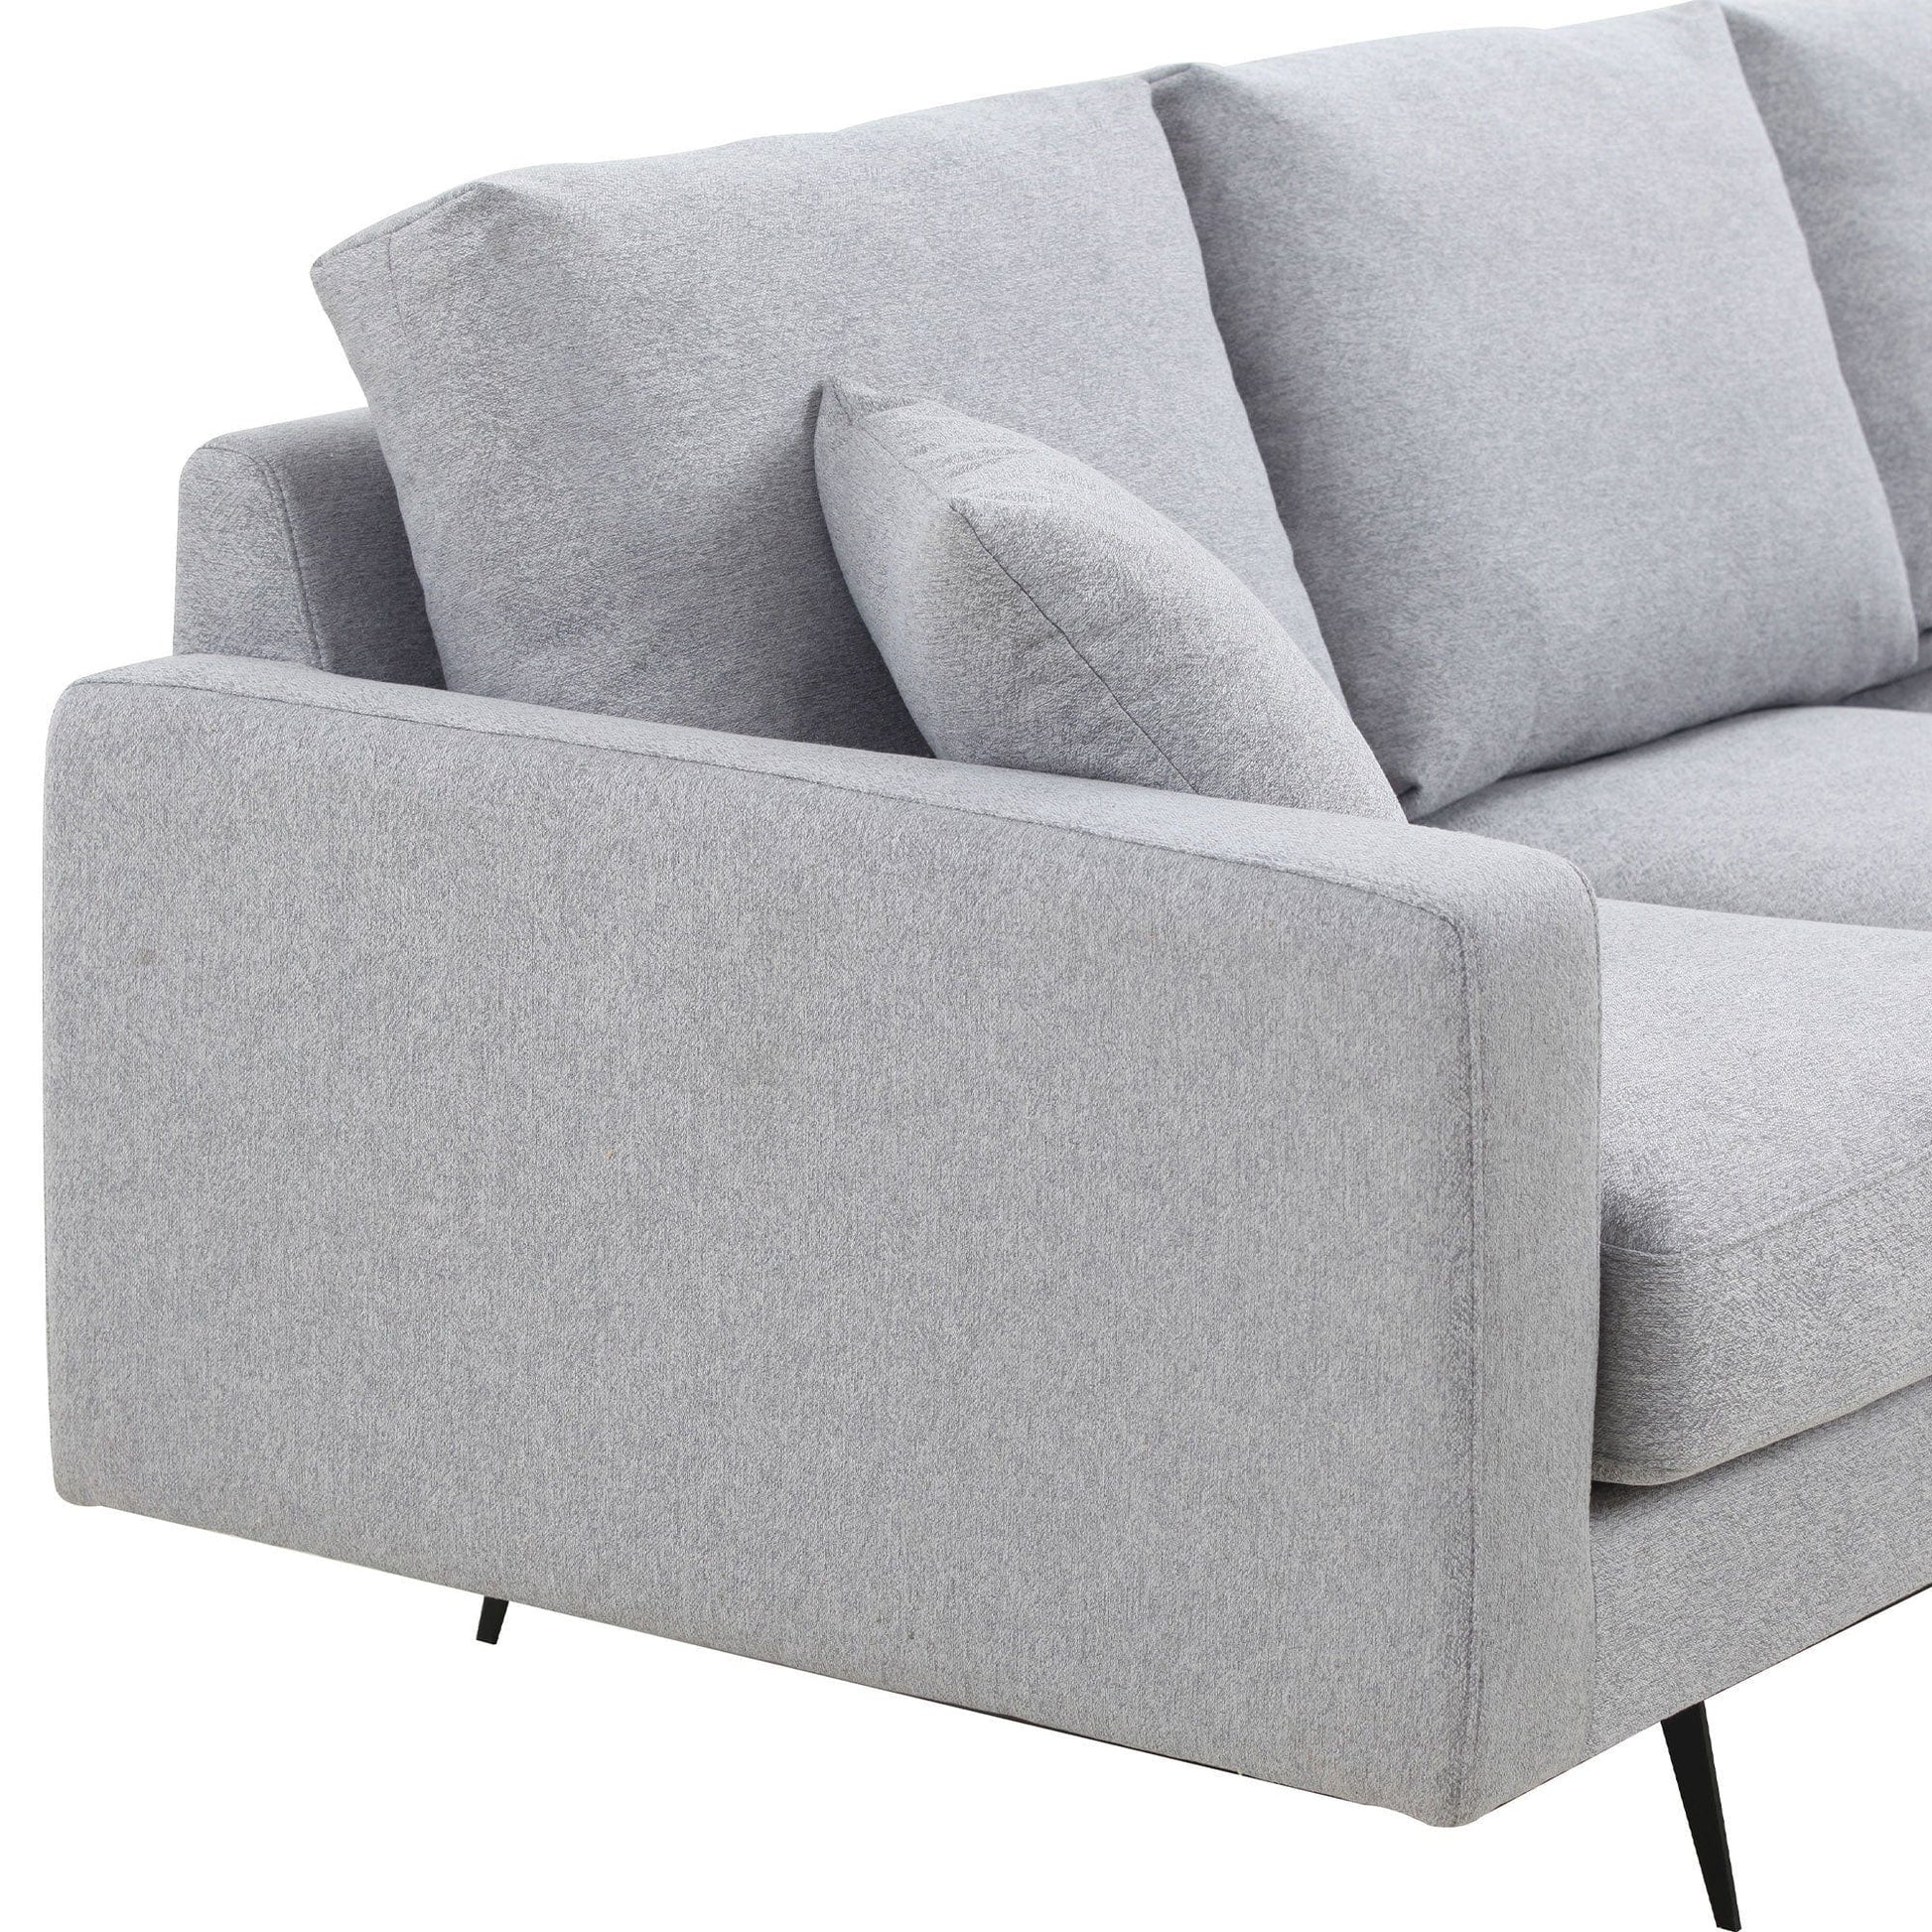 1st Choice Furniture Direct Sofa 1st Choice Modern Three Seat Sofa Couch in Light Grey with Pillow